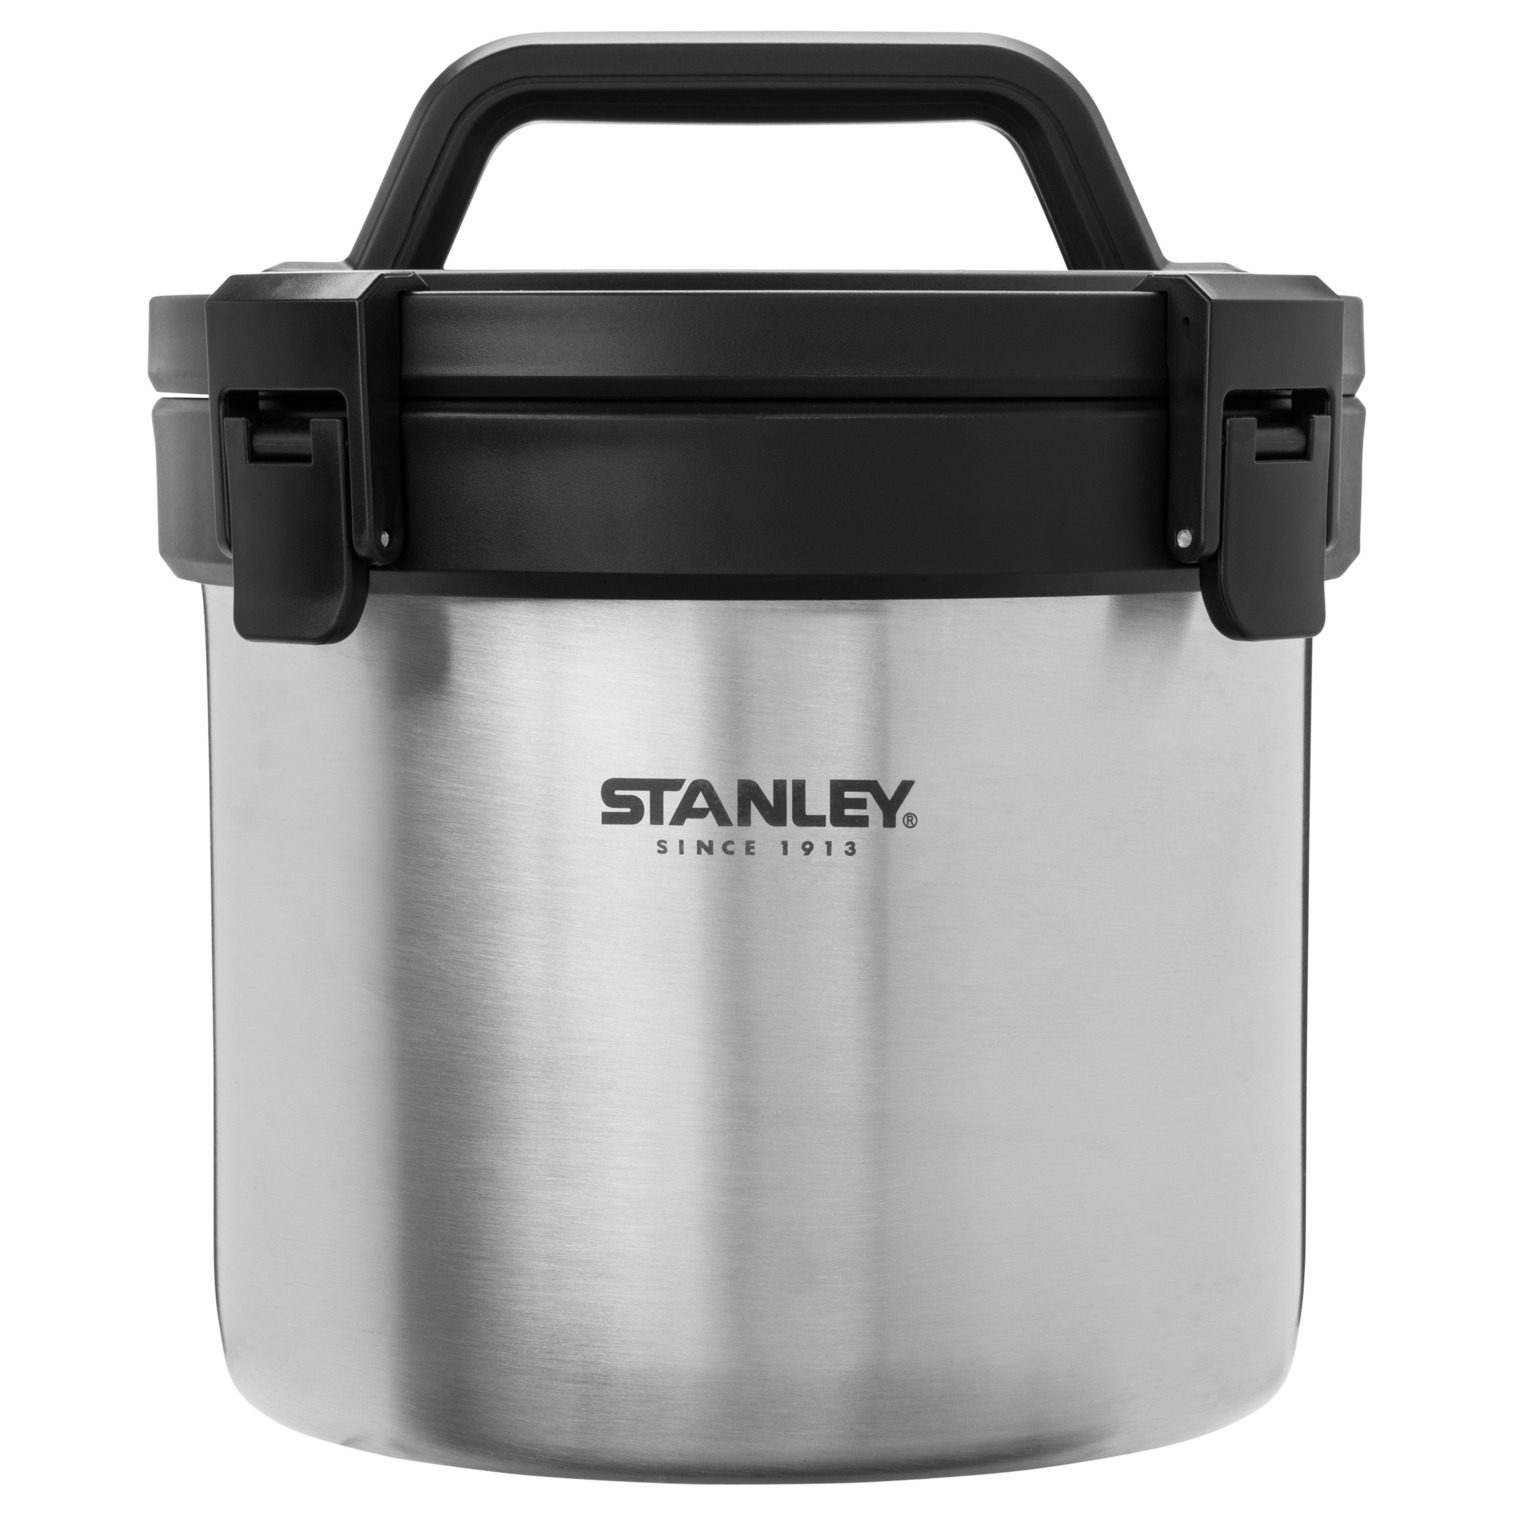 Adventure Stay Hot Camp Crock | 3QT: Stainless